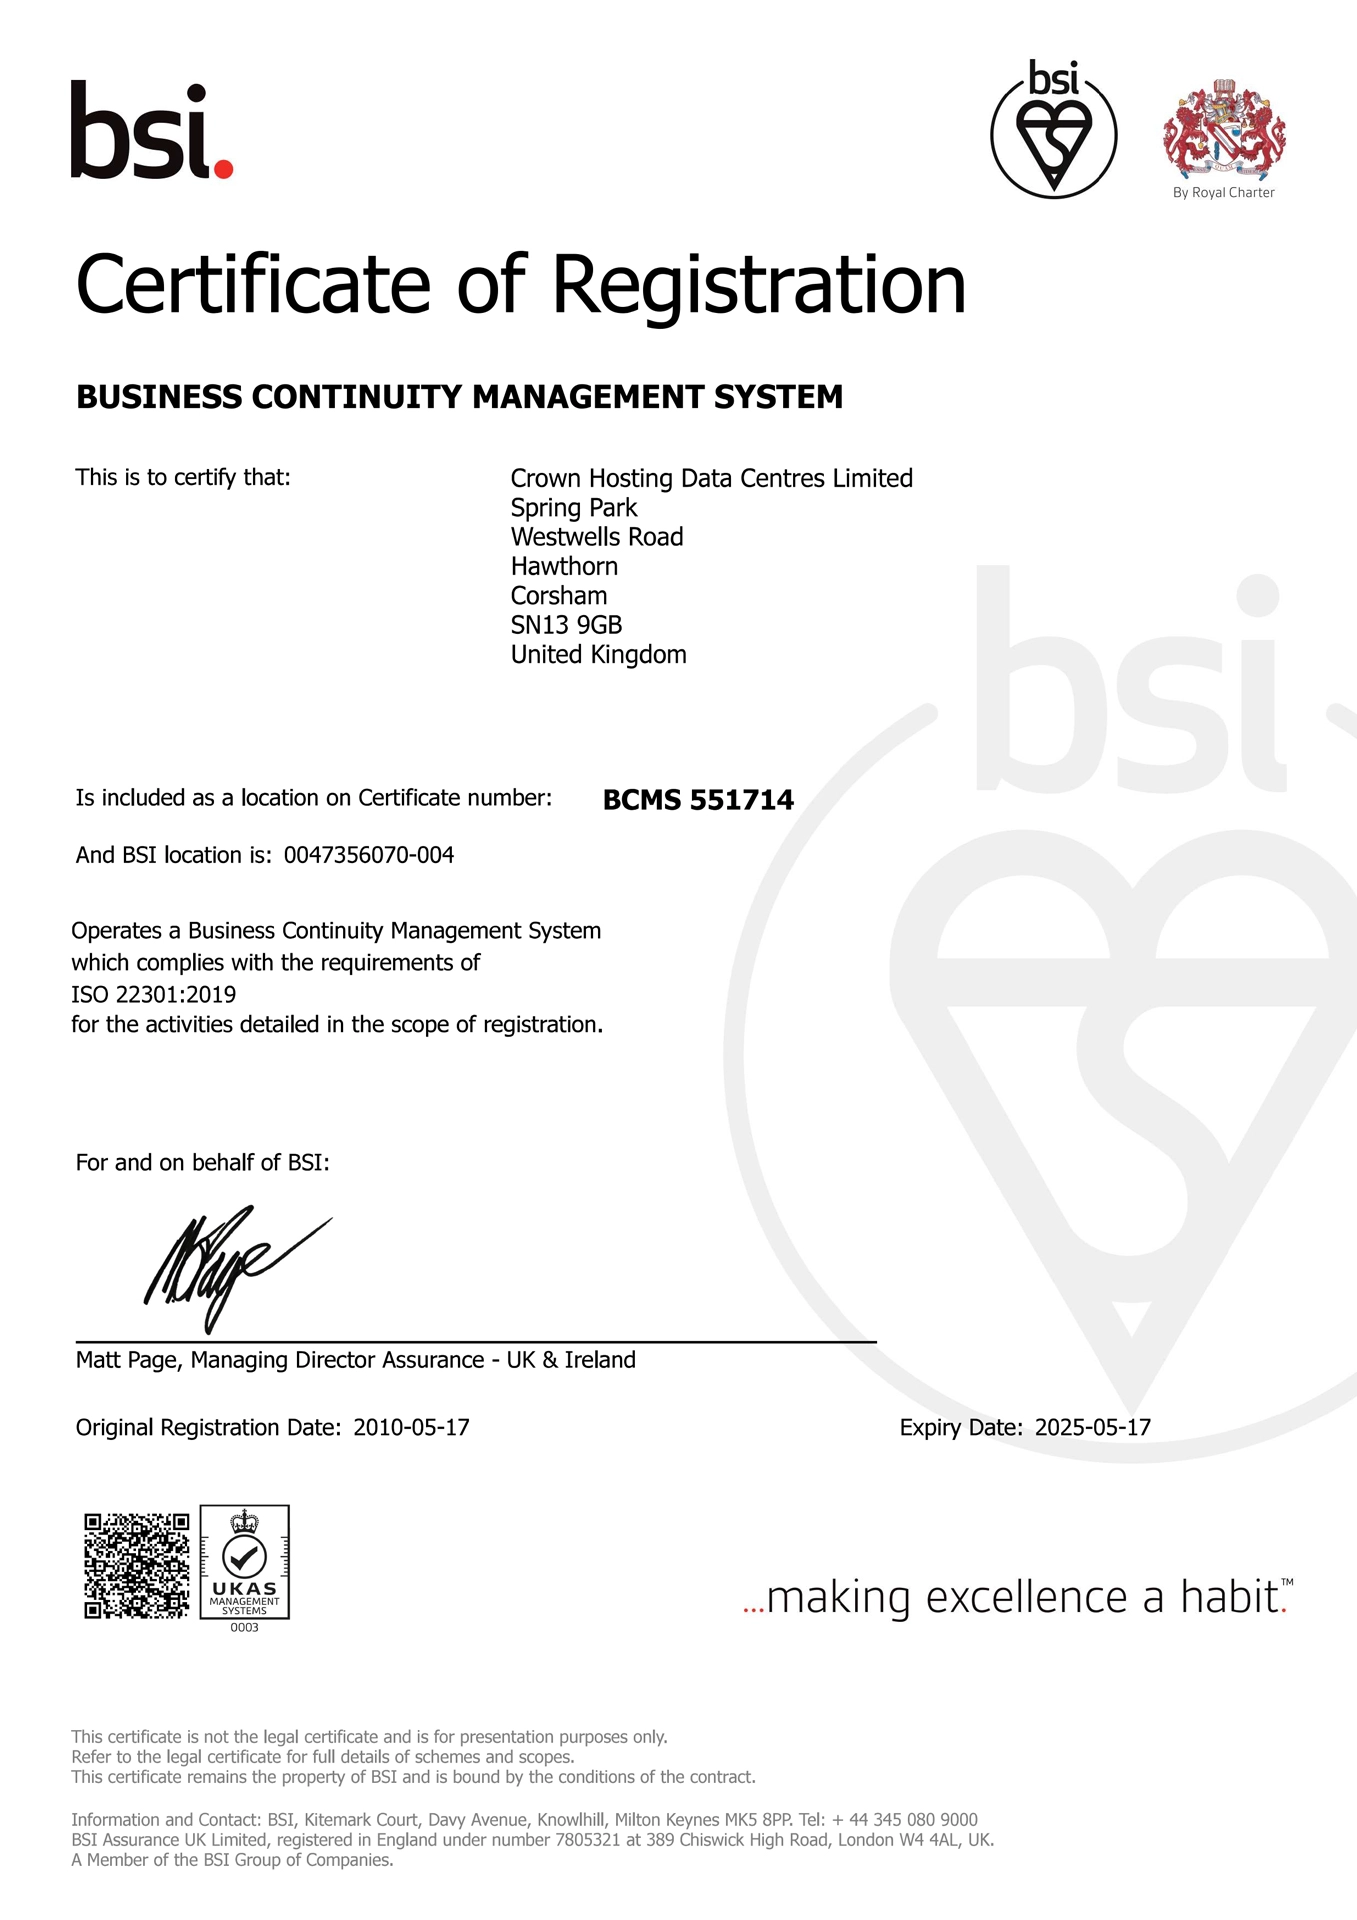 business-continuity-management-system-iso-22301-2012-exponential-e-certificate.webp